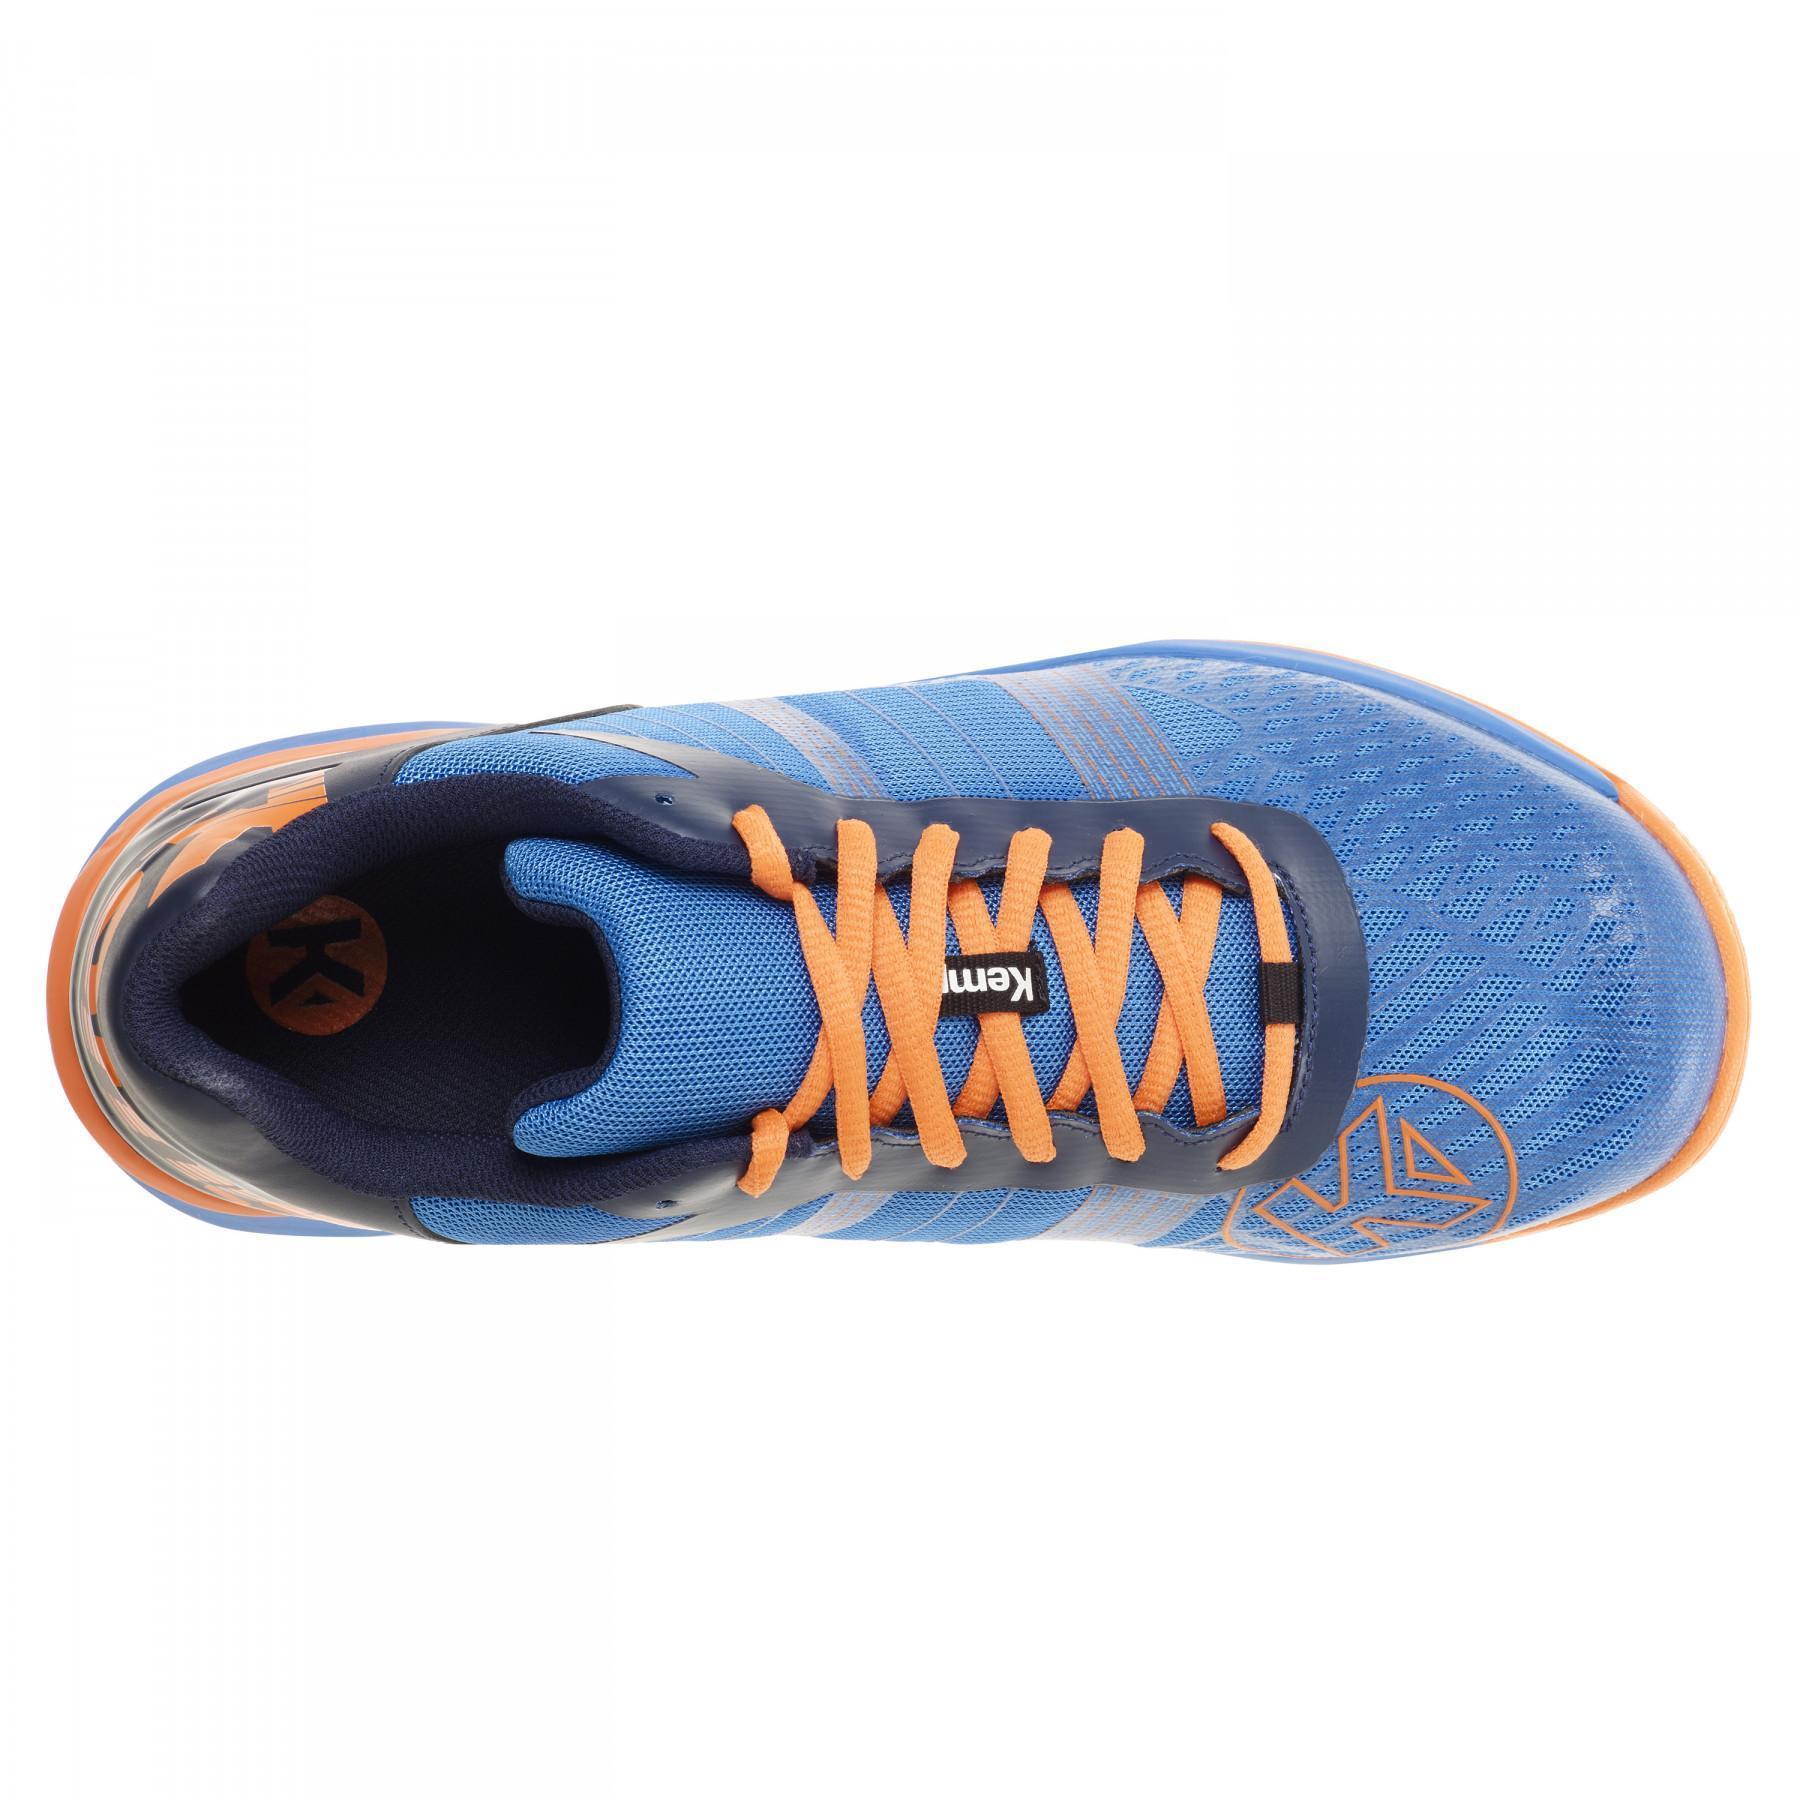 Chaussures Kempa Attack Three Contender